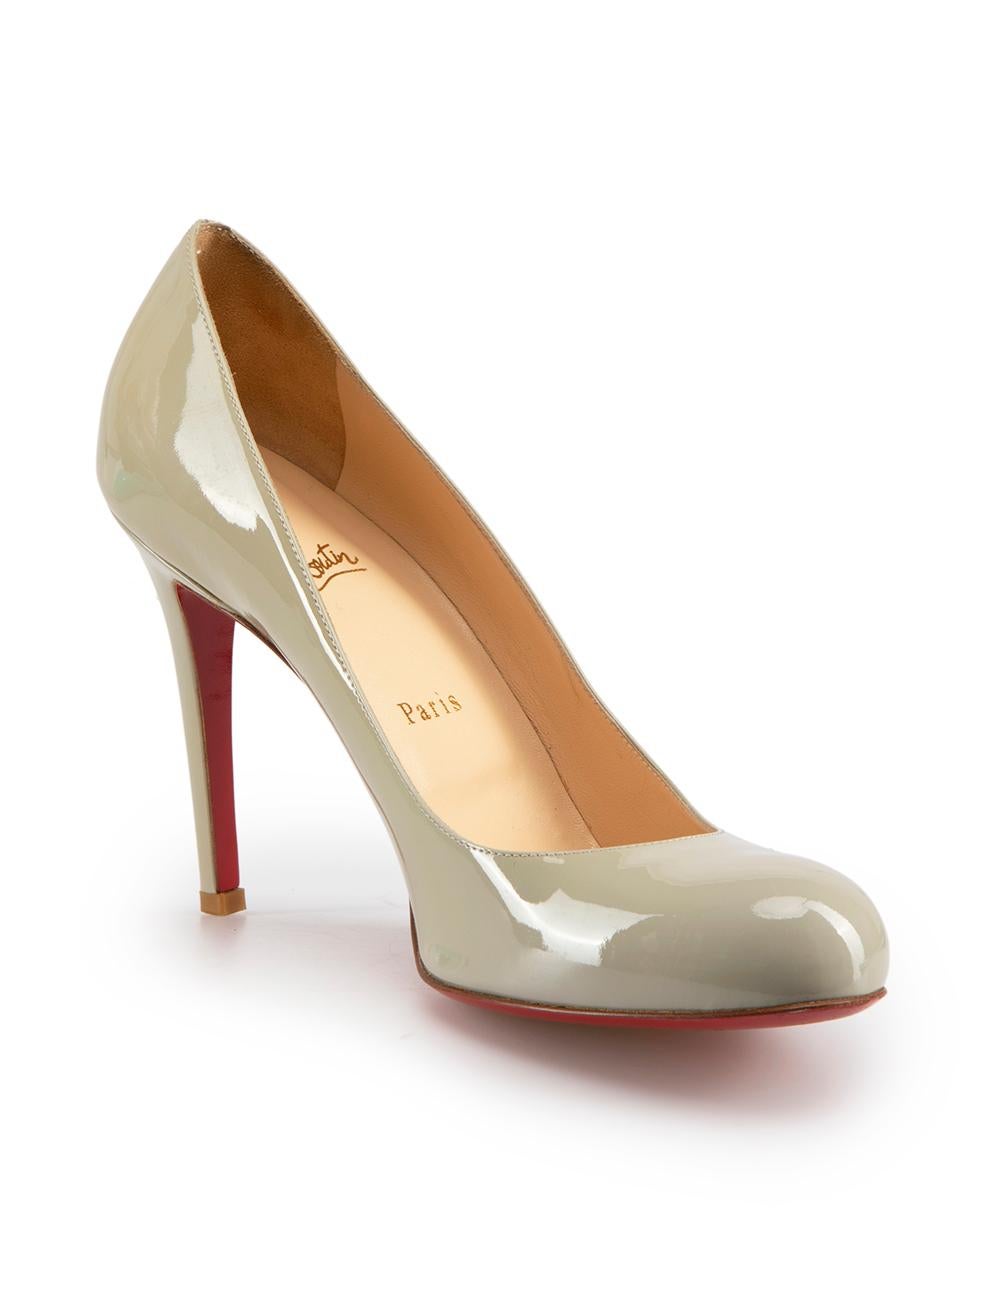 CONDITION is Very good. Minimal wear to heels is evident. Minimal wear found with a handful of small glue marks seen at interior and very mild abrasion to the outsoles on this used Christian Louboutin designer resale item.
 
Details
Grey
Patent